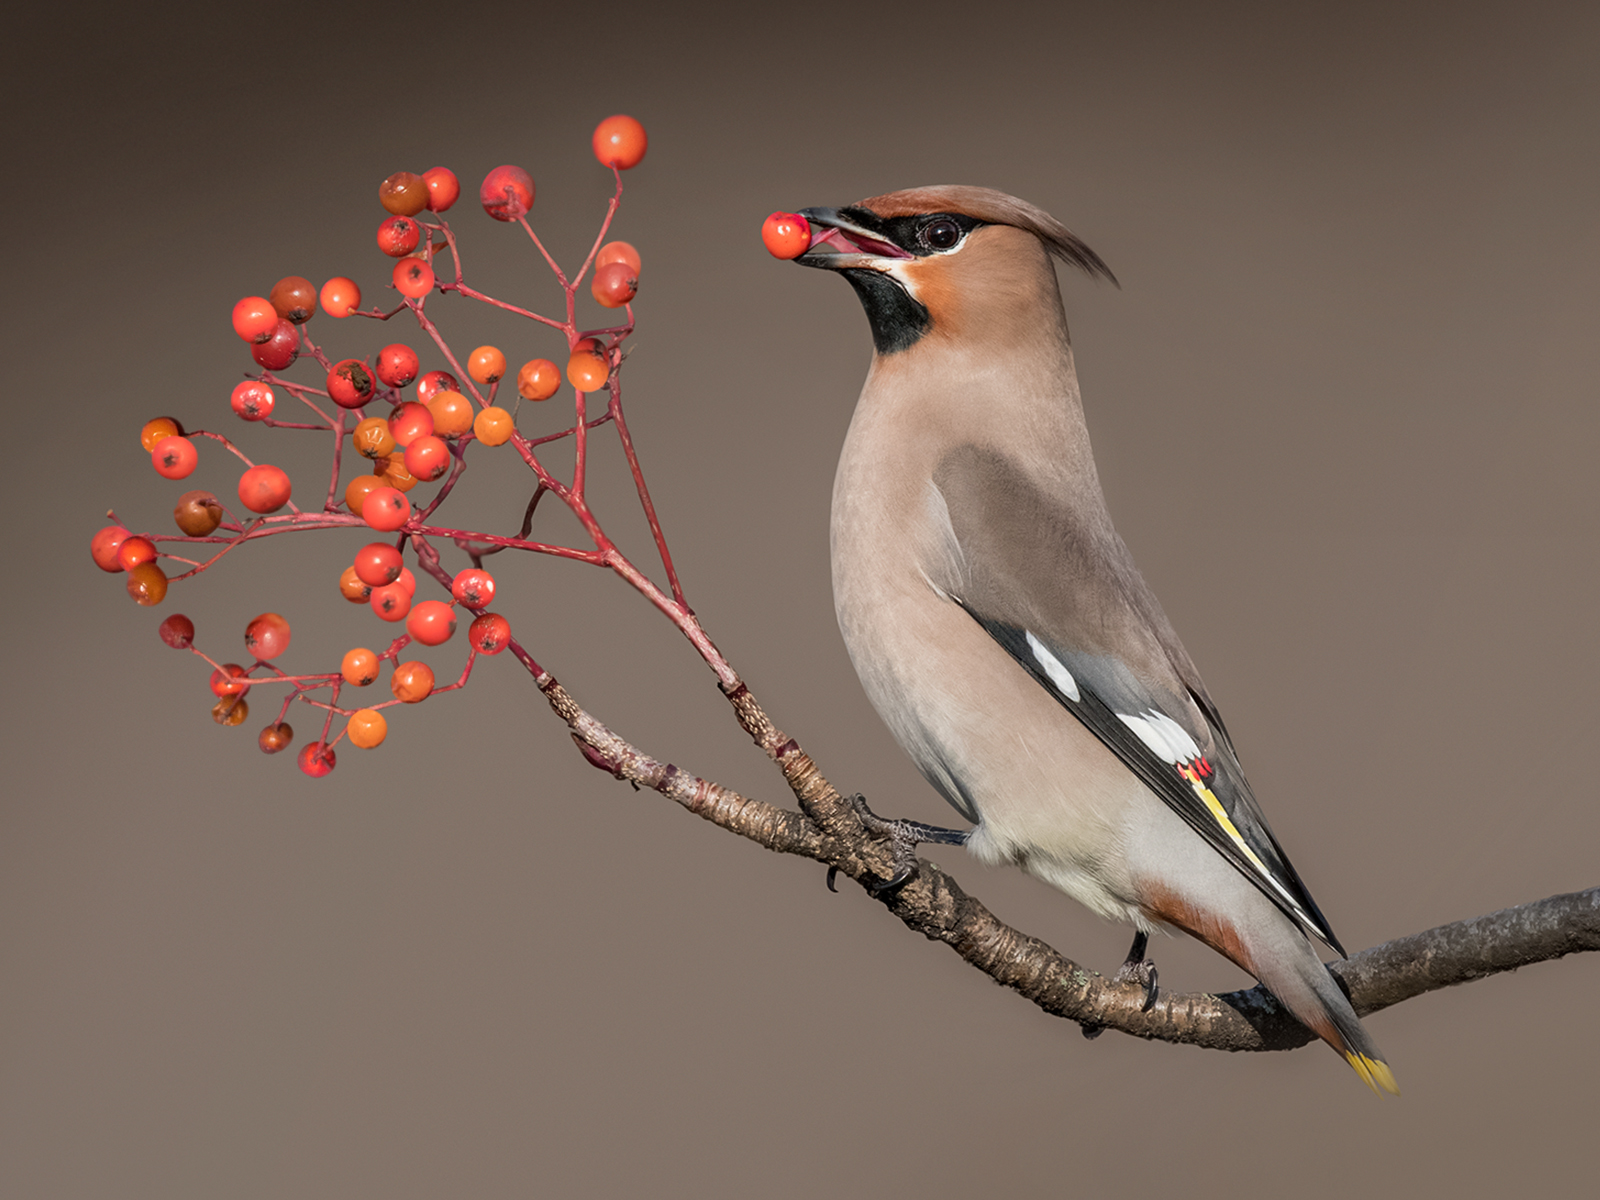 W0447189_Philip-Barber_Waxwing-with-rowen-berry